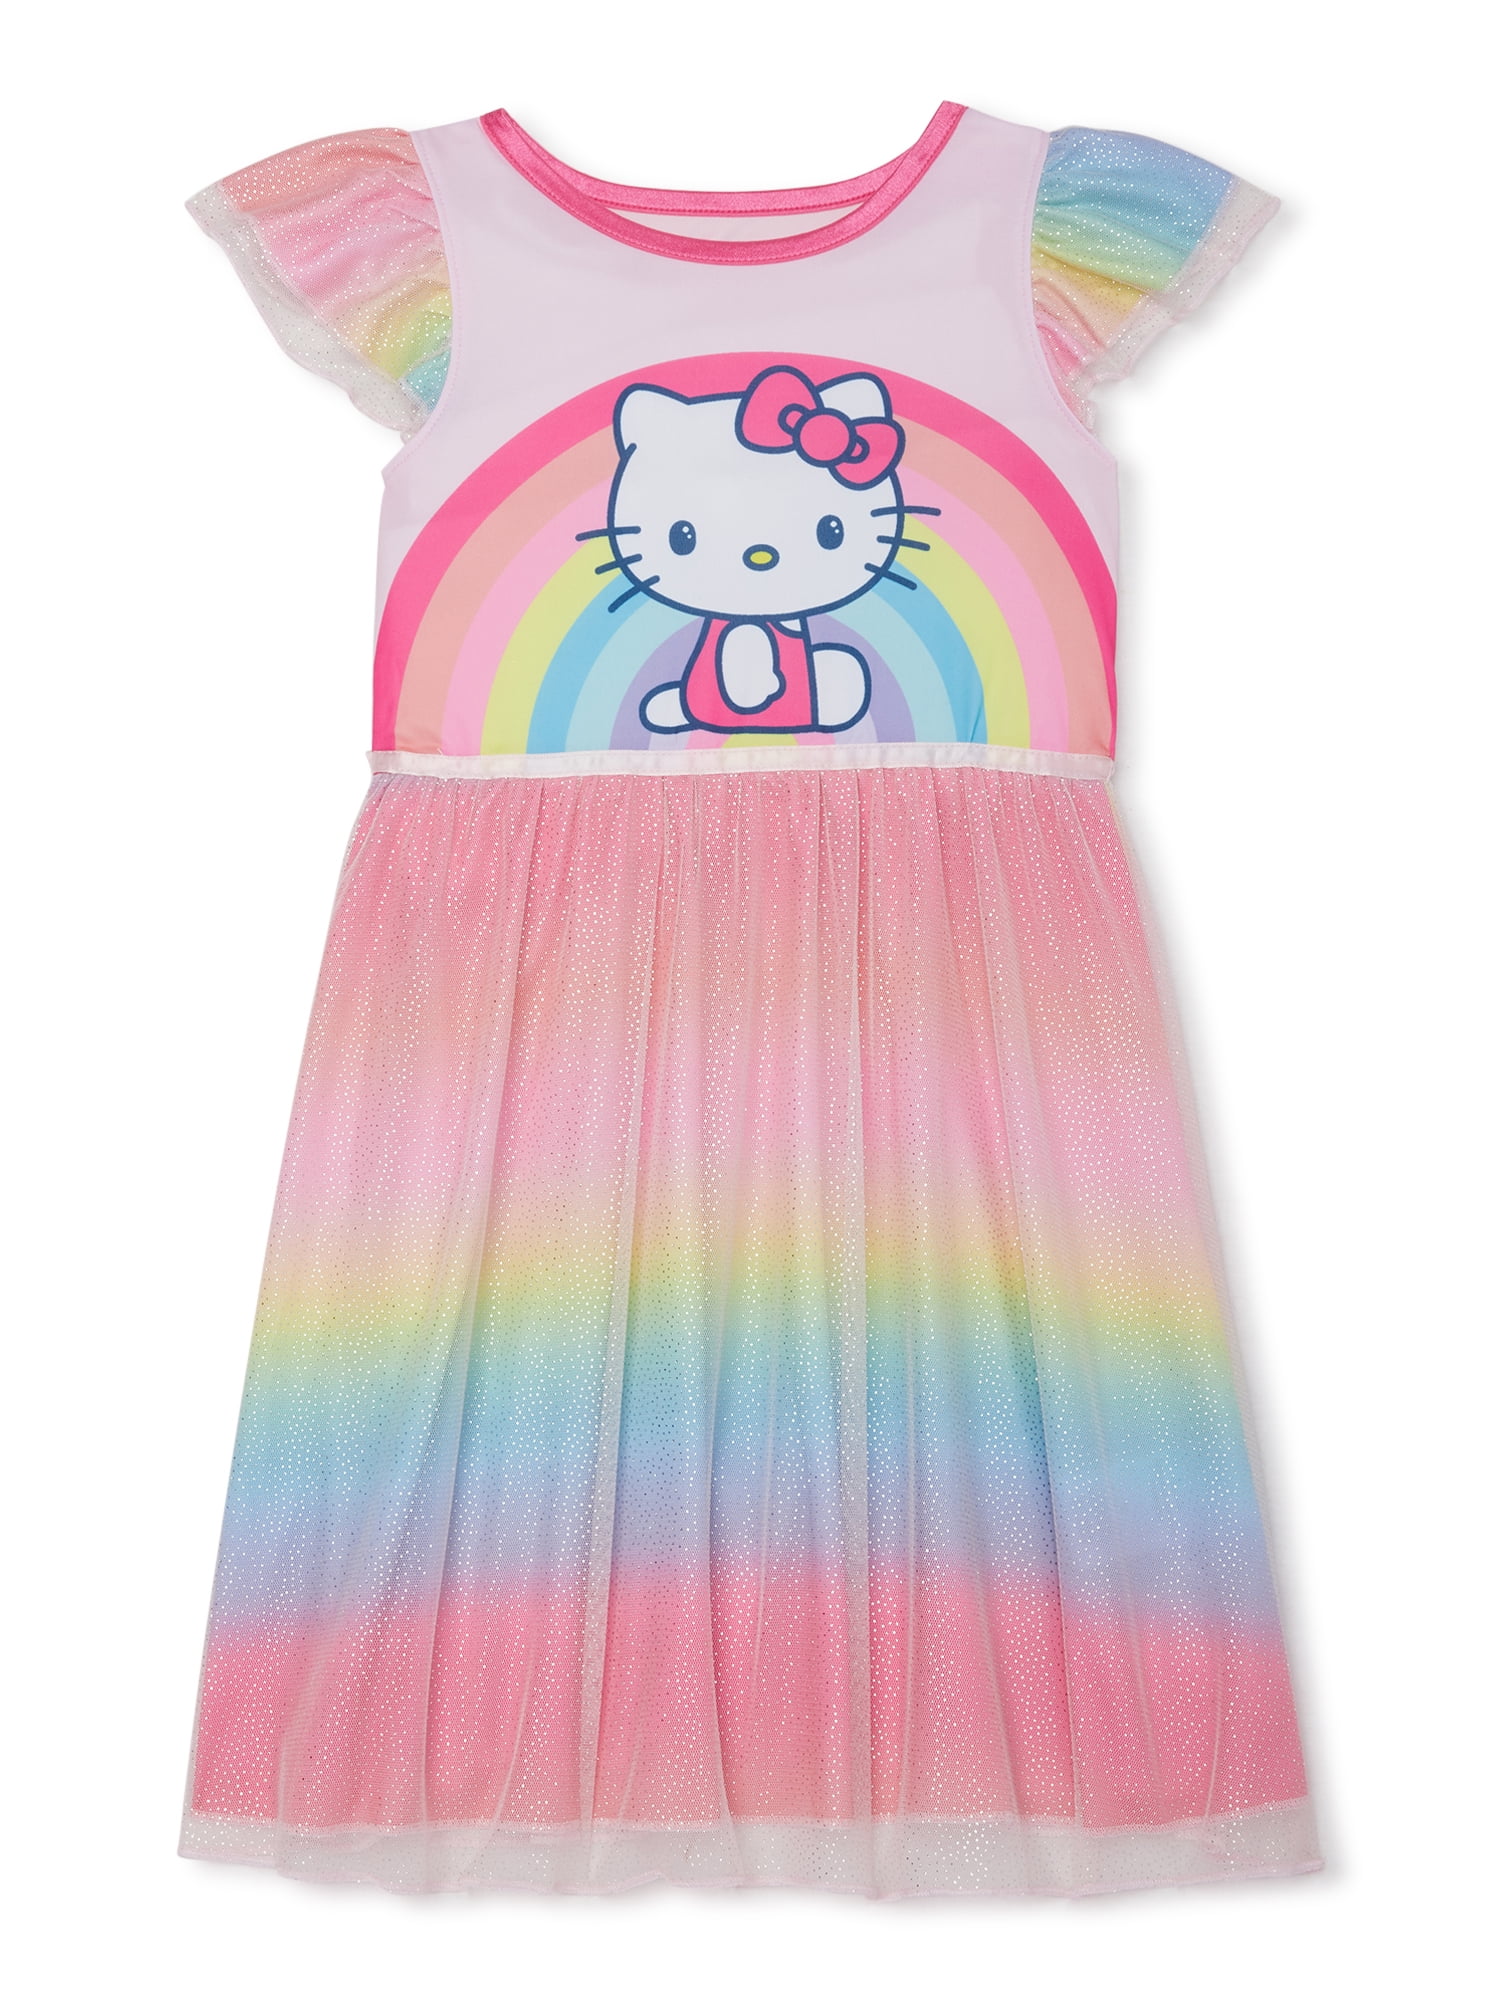 hello kitty gown for baby